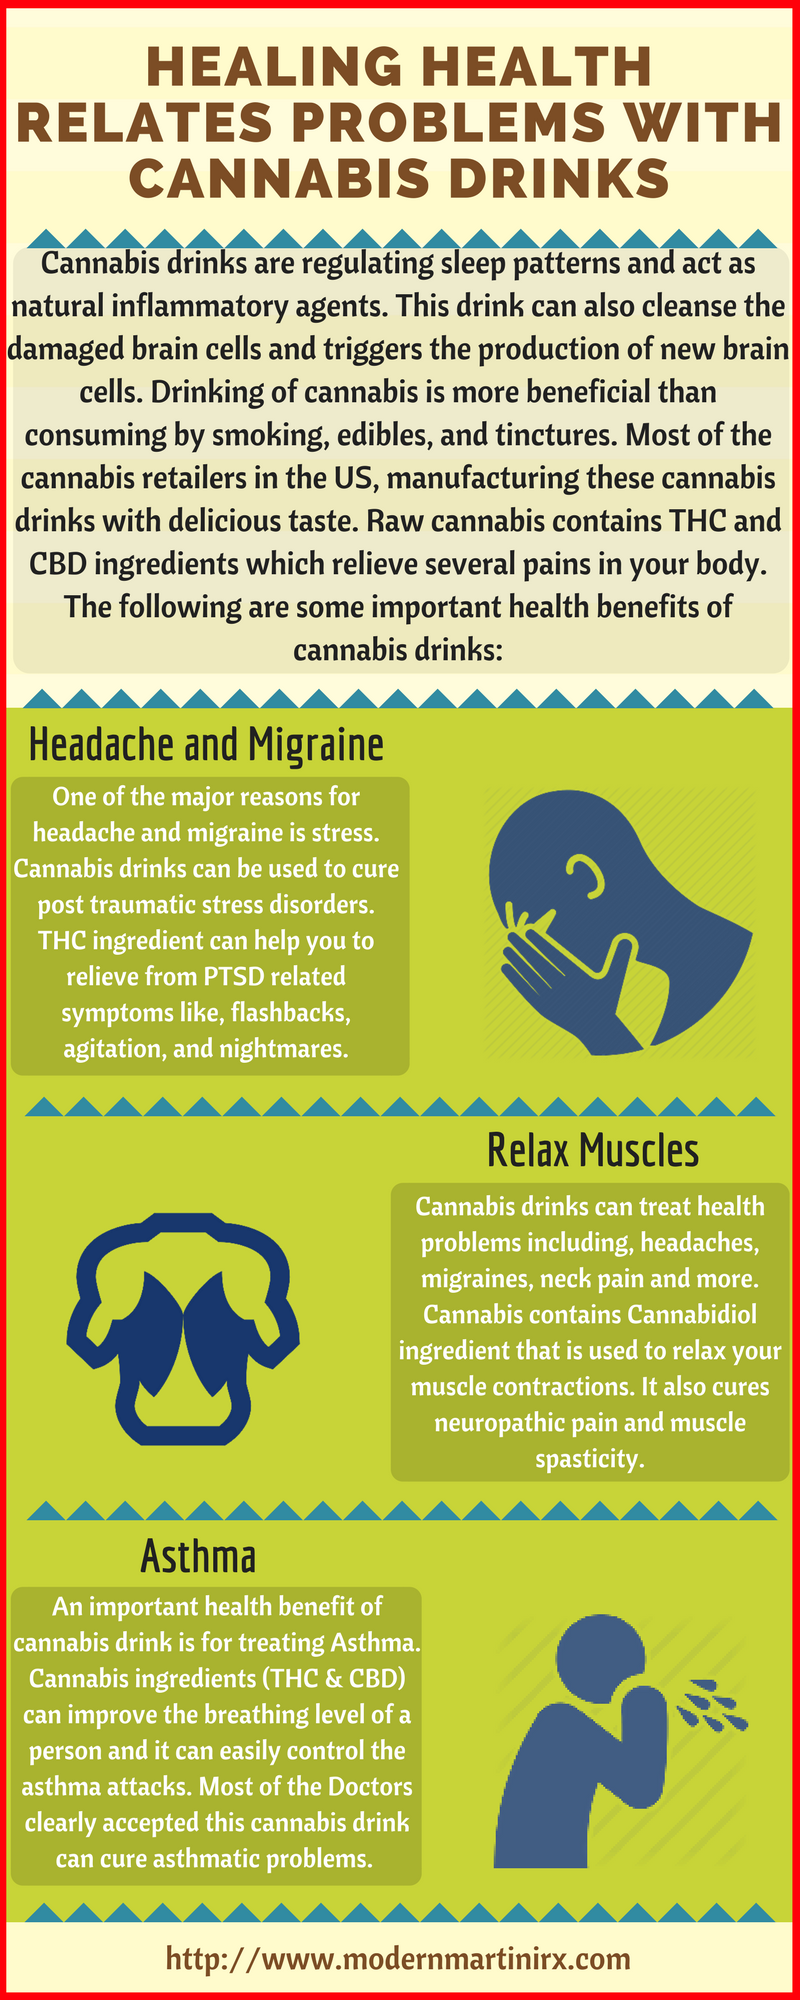 Healing Health Relates Problems with Cannabis Drinks